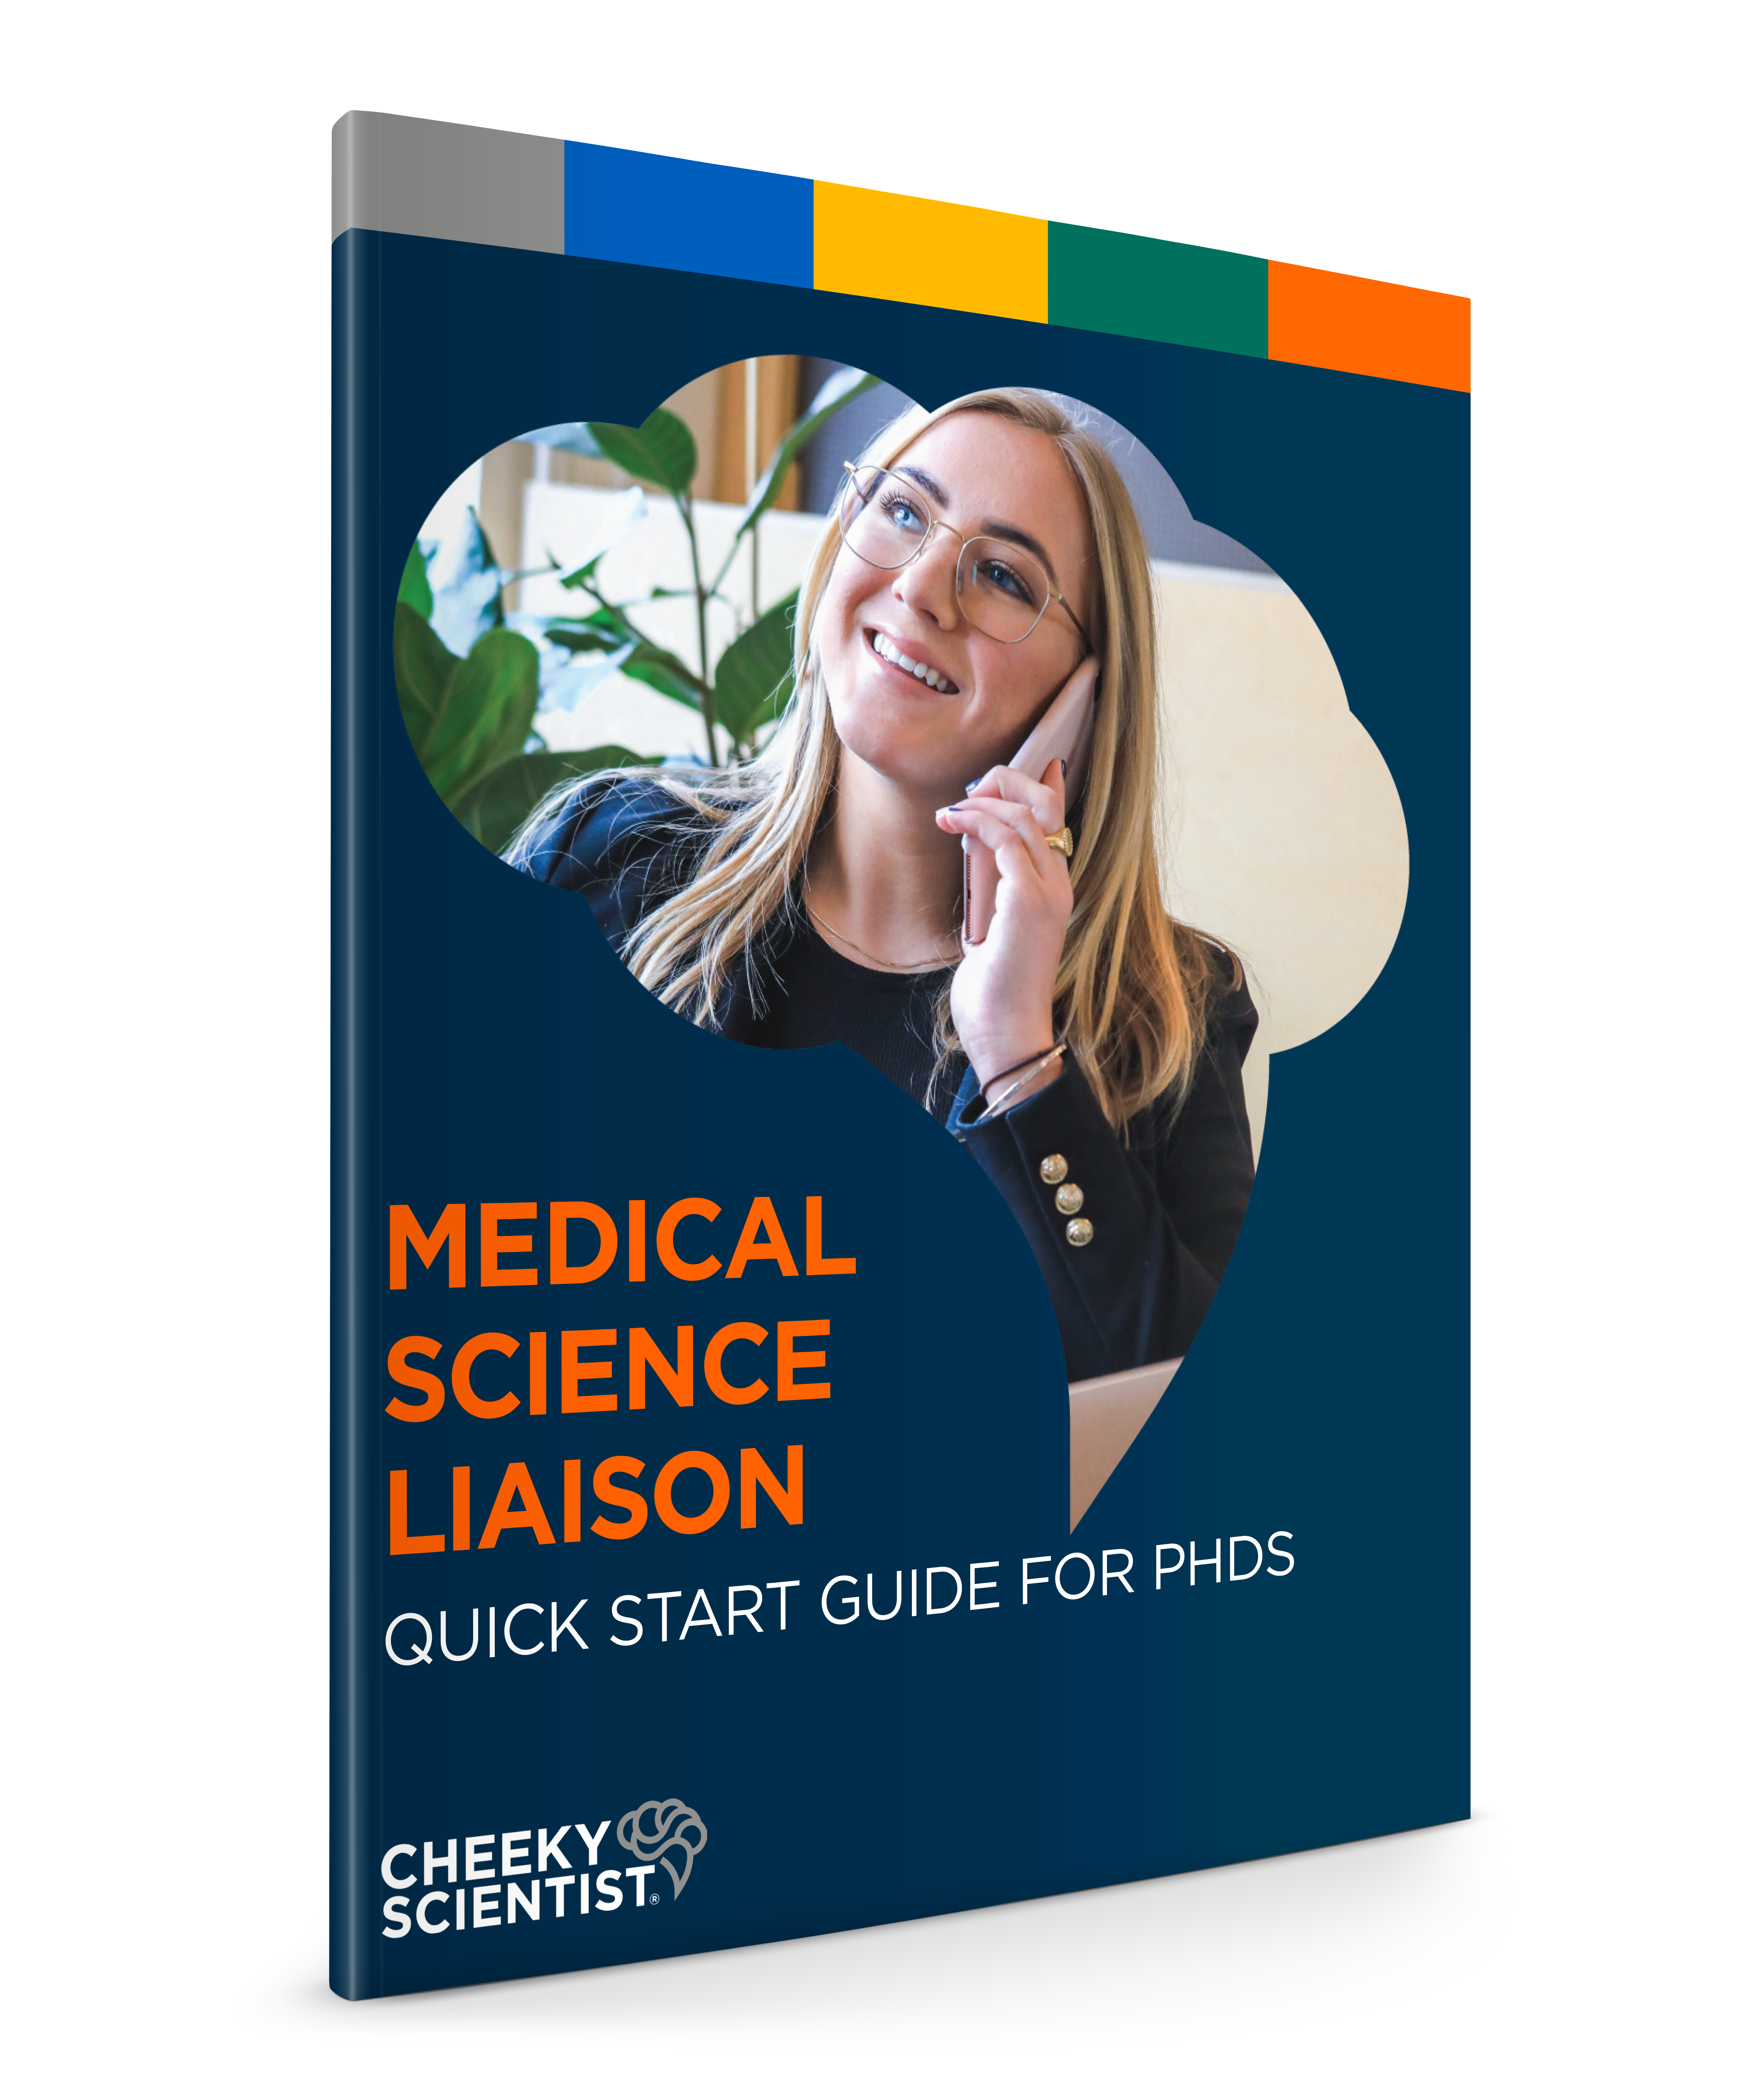 Medical Science Liaison Quick Start Guide for PhDs